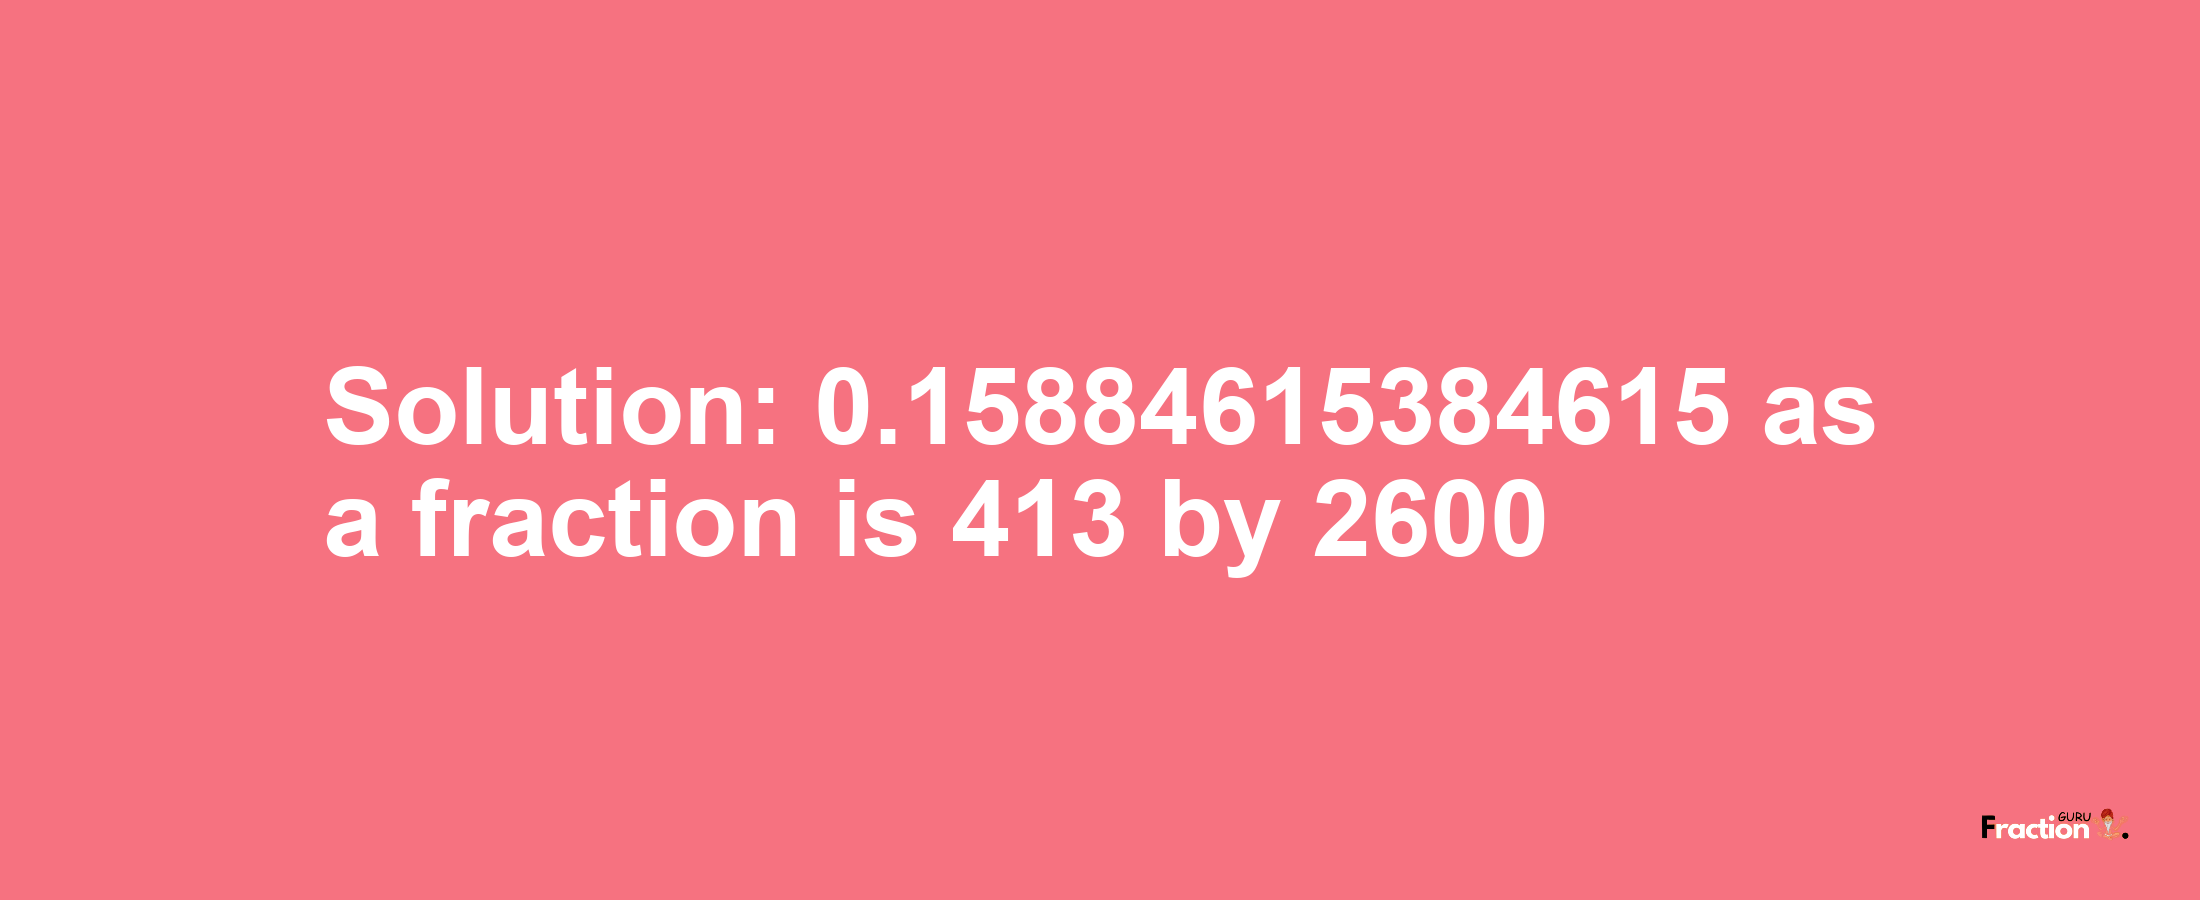 Solution:0.15884615384615 as a fraction is 413/2600